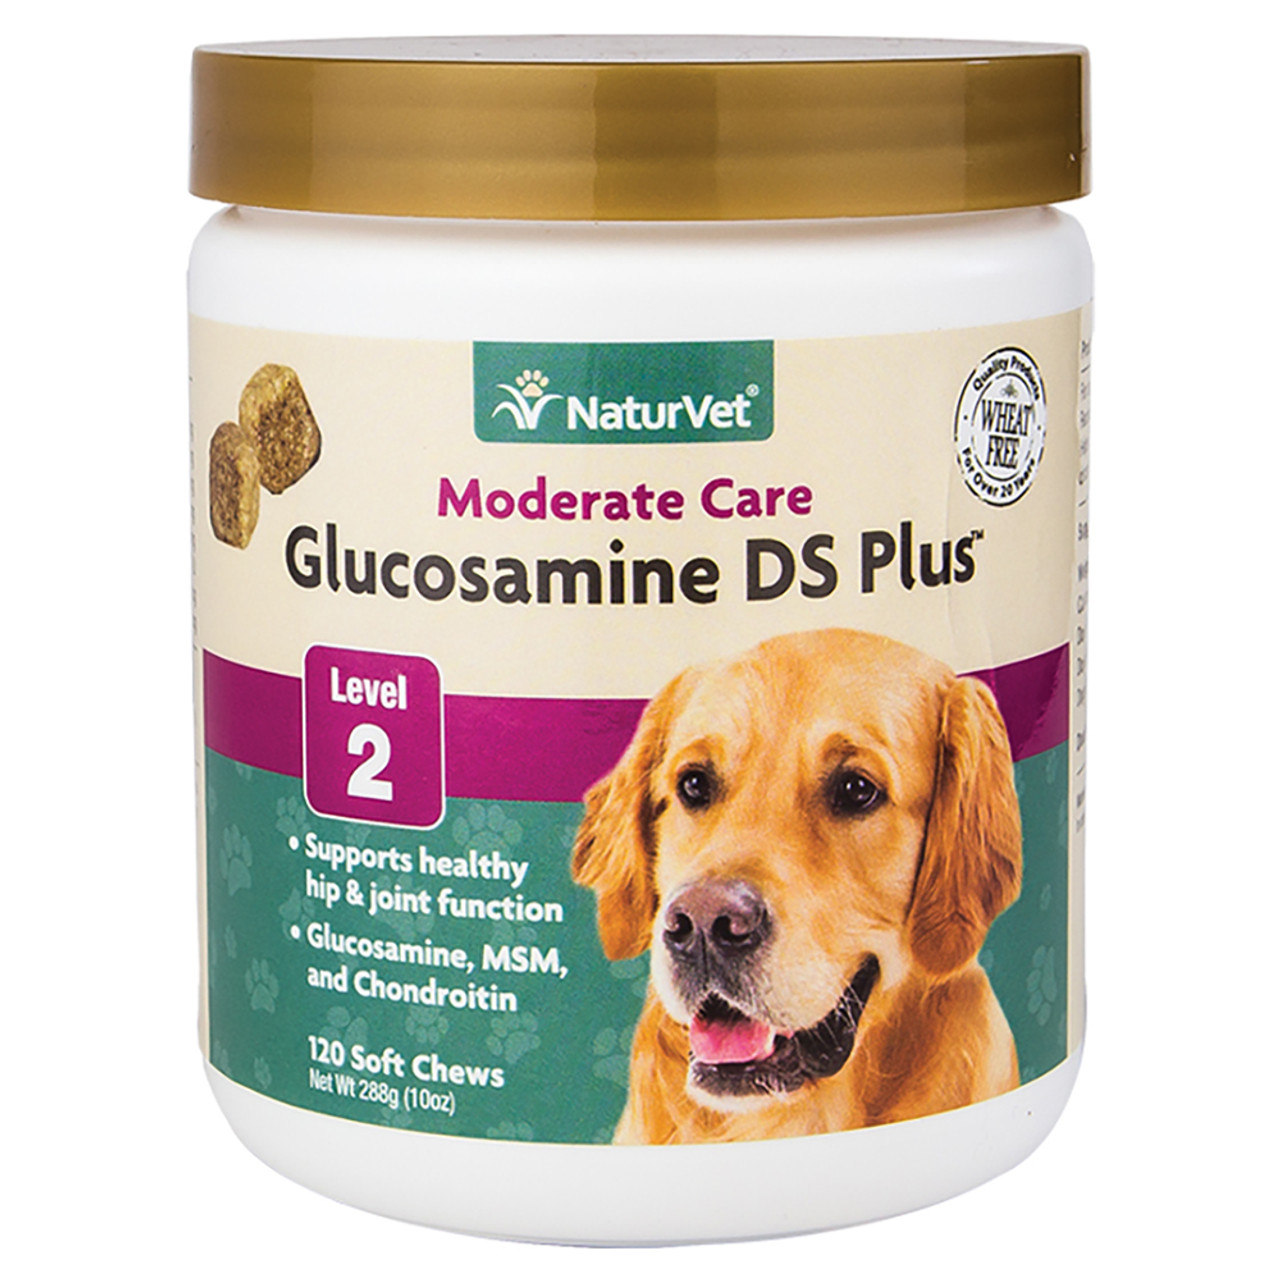 Best Glucosamine for Dogs - PetGuide